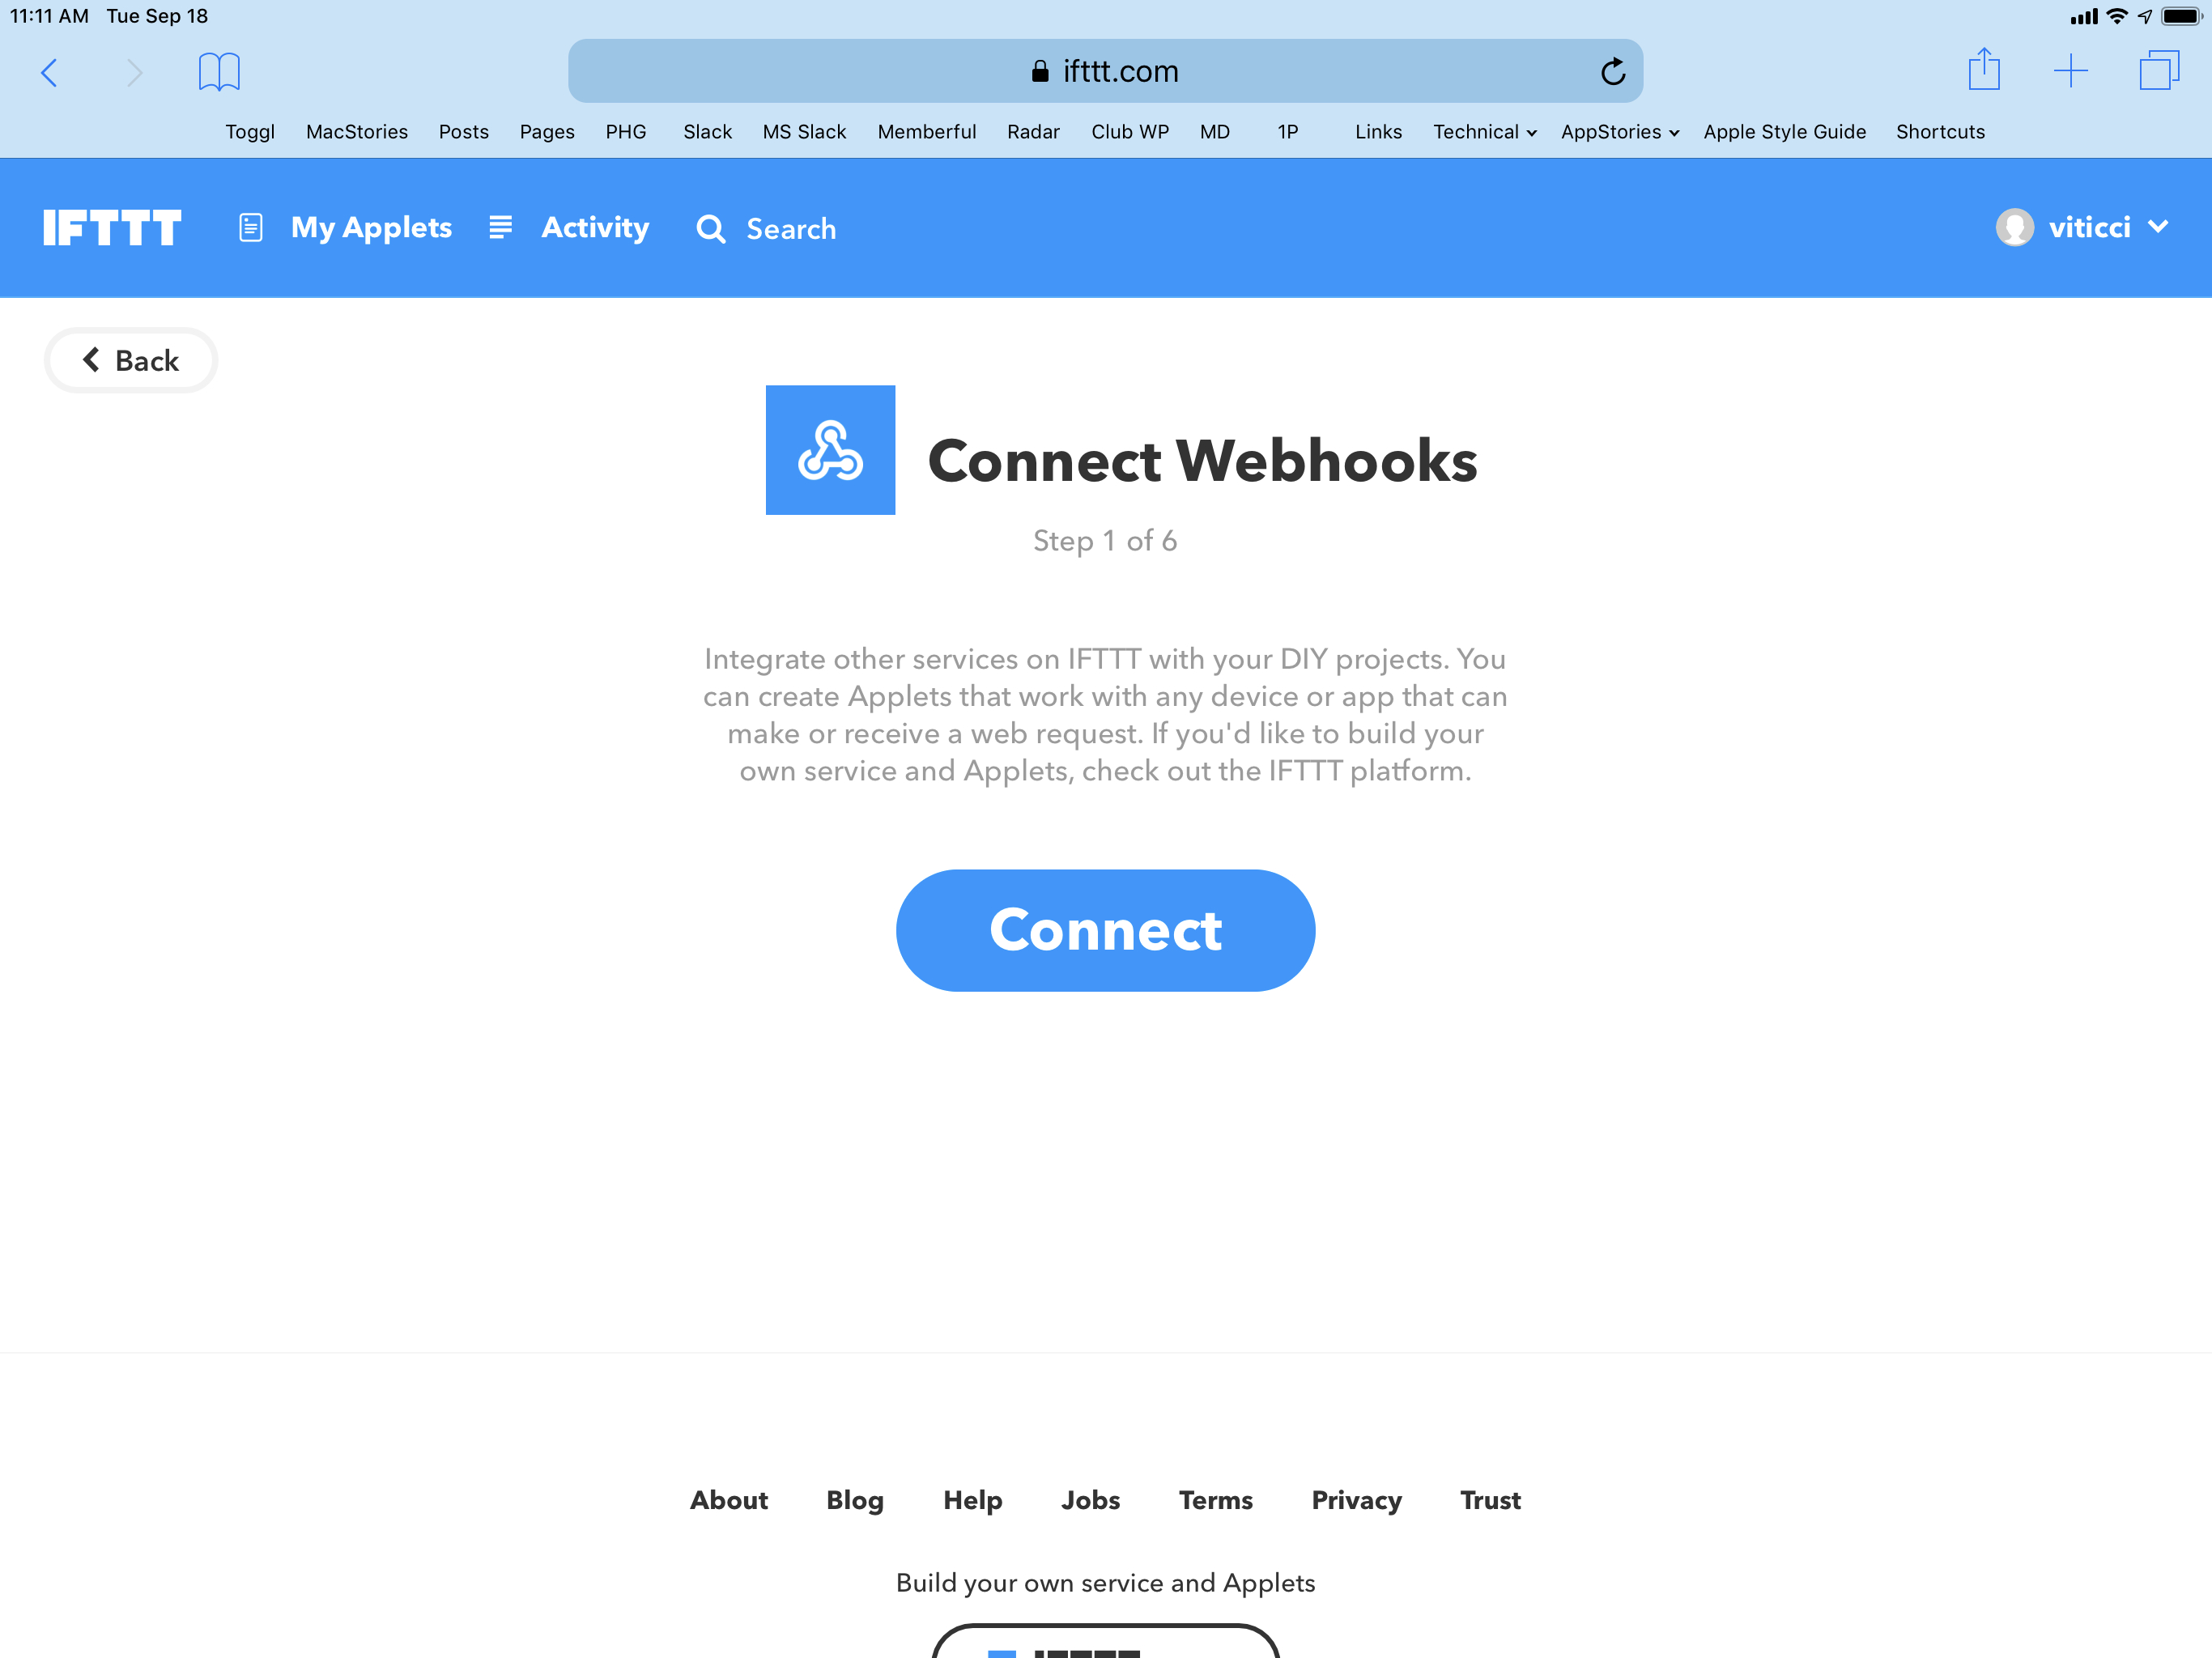 Connect your IFTTT account to the Webhooks channel.